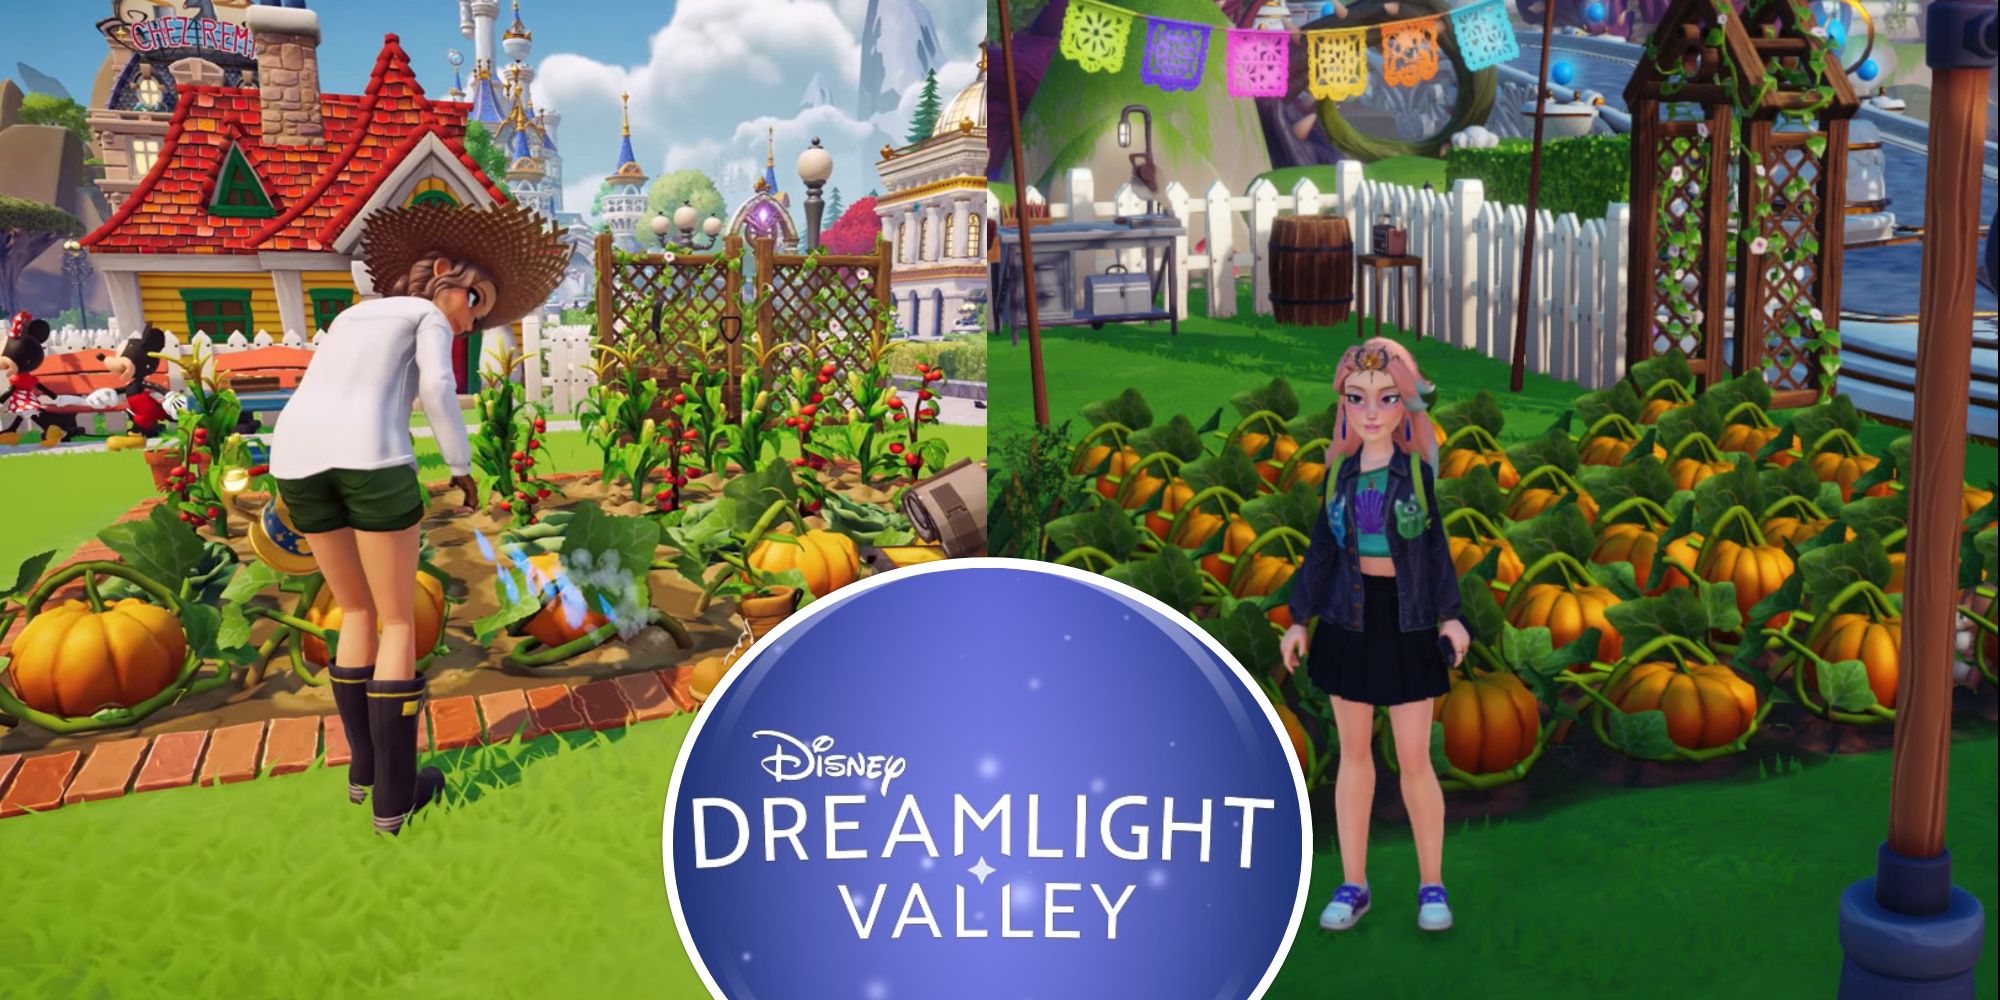 Disney Dreamlight Valley split image two screenshots of characters with crops and the game's logo